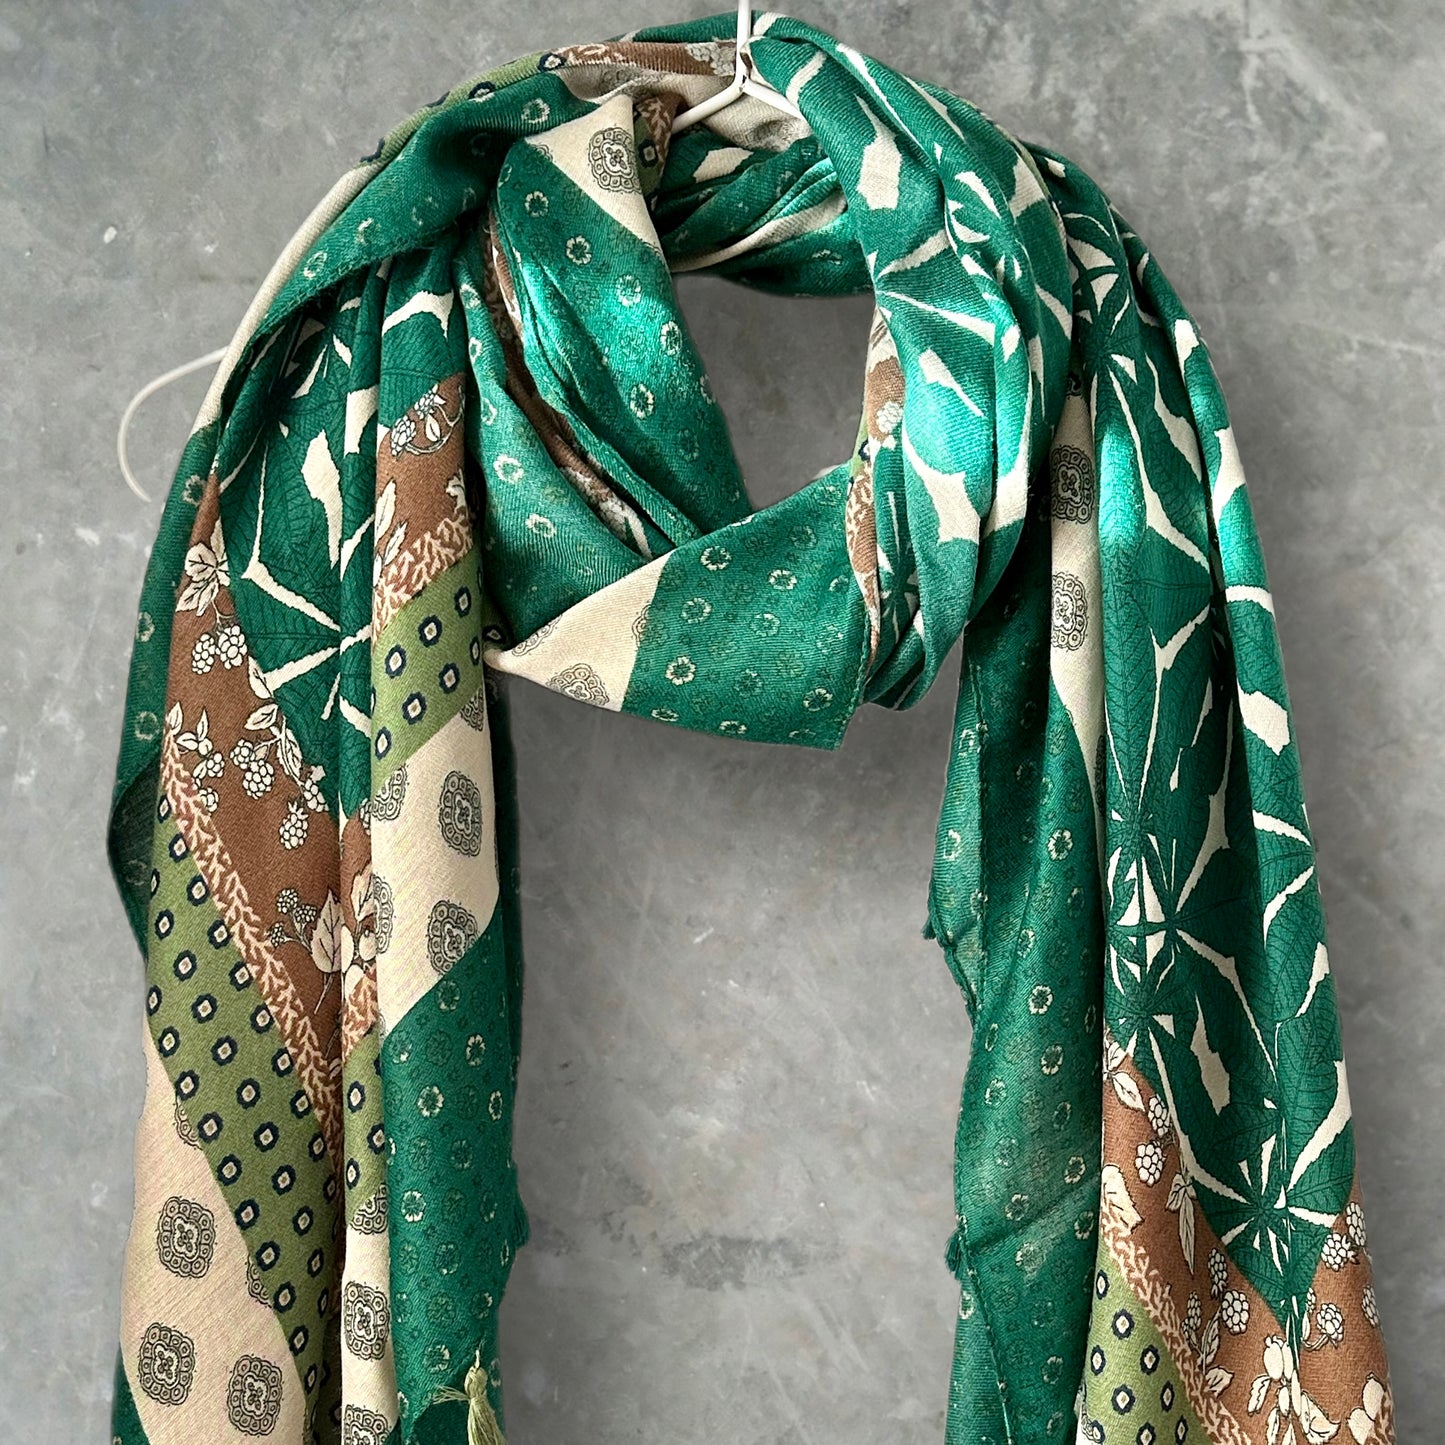 Green Cotton Scarf with Bohemian Flowers Pattern and Tassels.Perfect for Summer, Autumn and Gifts for Her Birthday,Christmas or Mother.